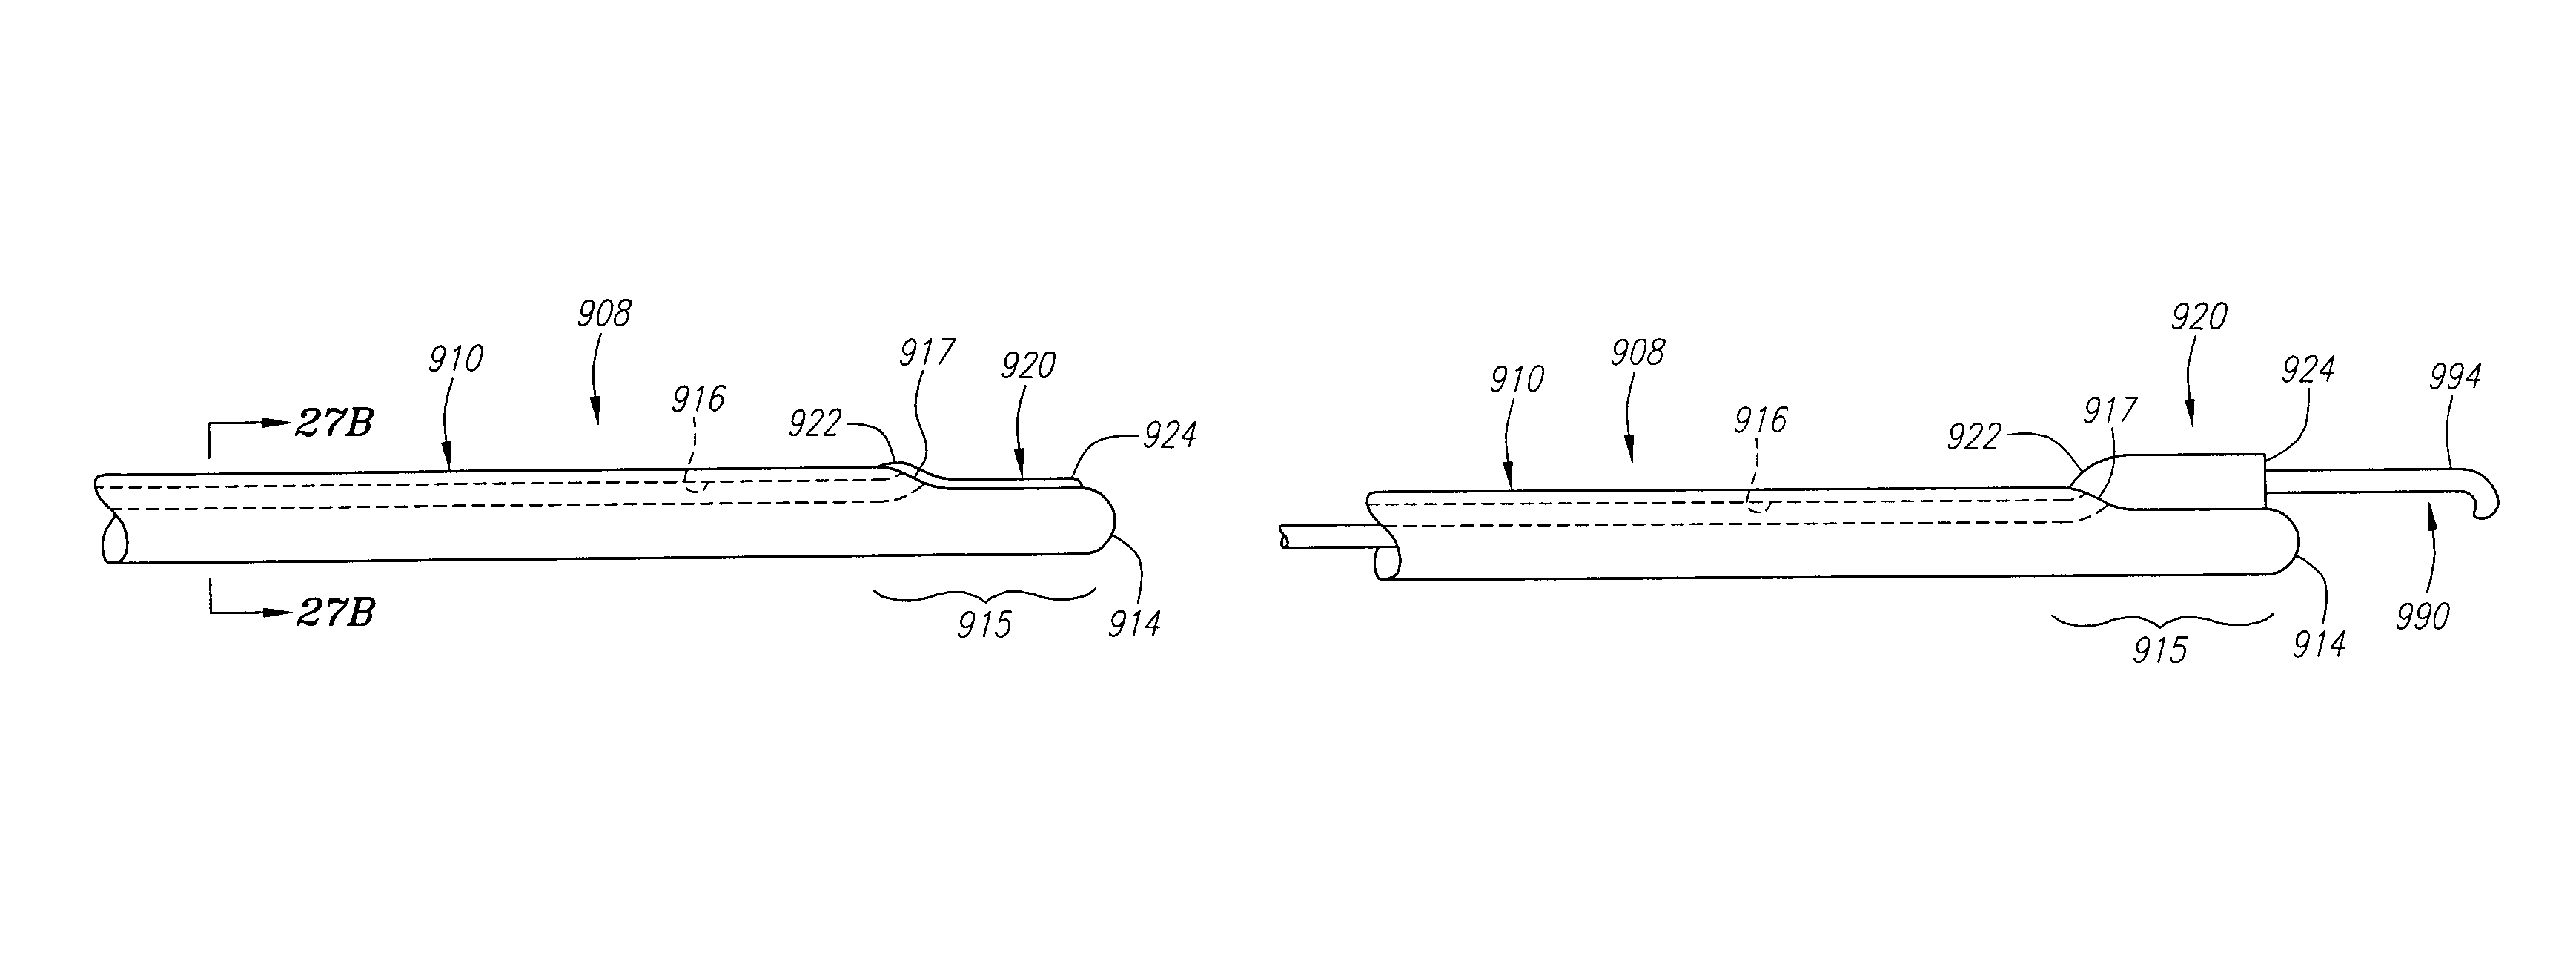 Expandable sheath for delivering instruments and agents into a body lumen and methods for use